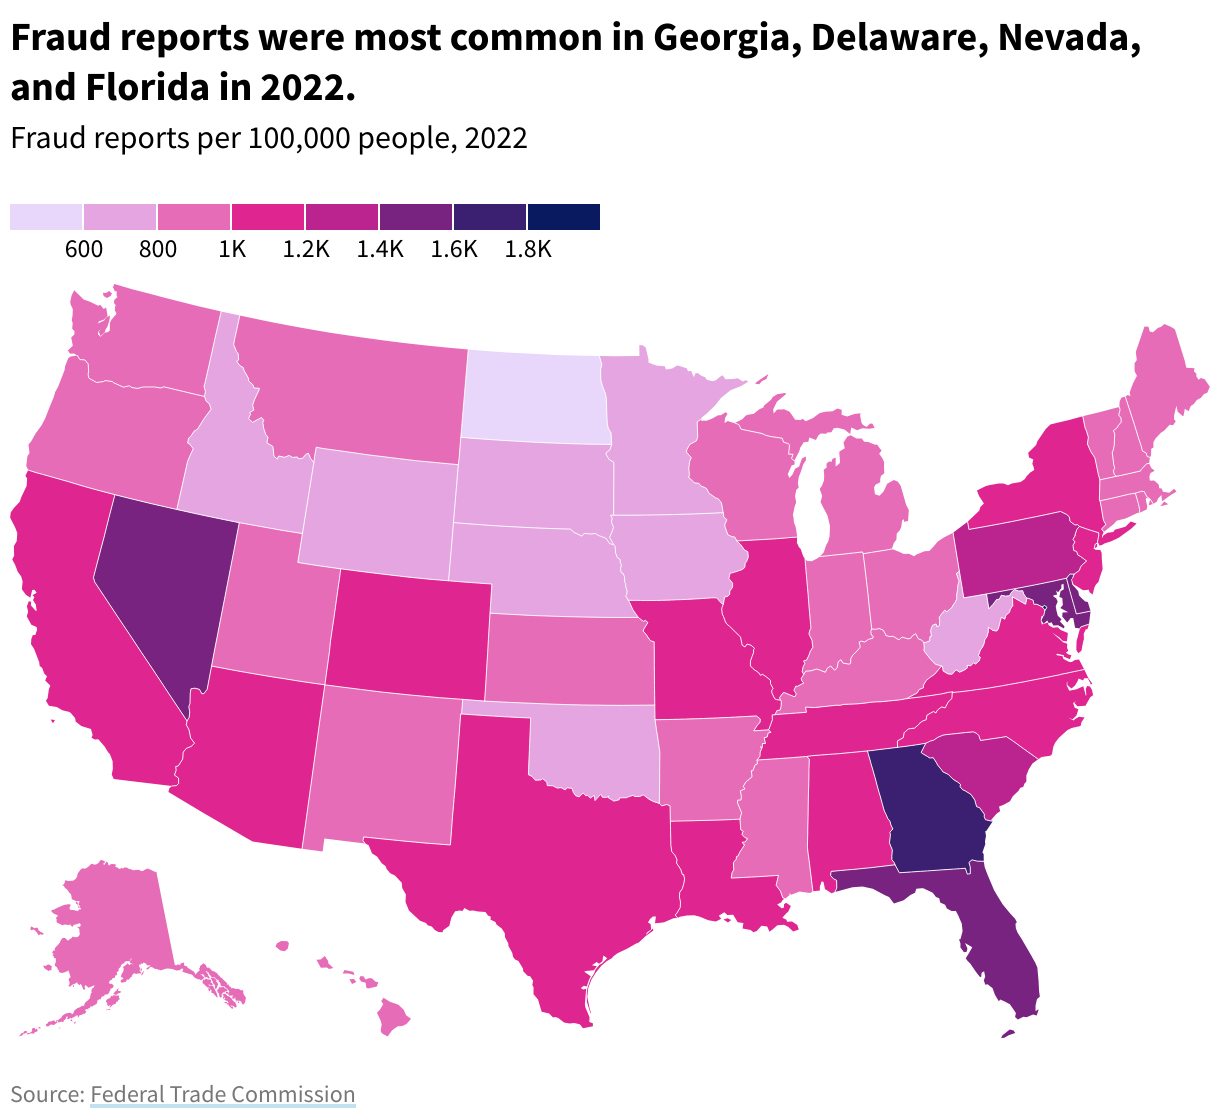 US map of fraud reports per 100,000 people in 2022.  Fraud reports were most common in Georgia, Delaware, Nevada, and Florida in 2022. 